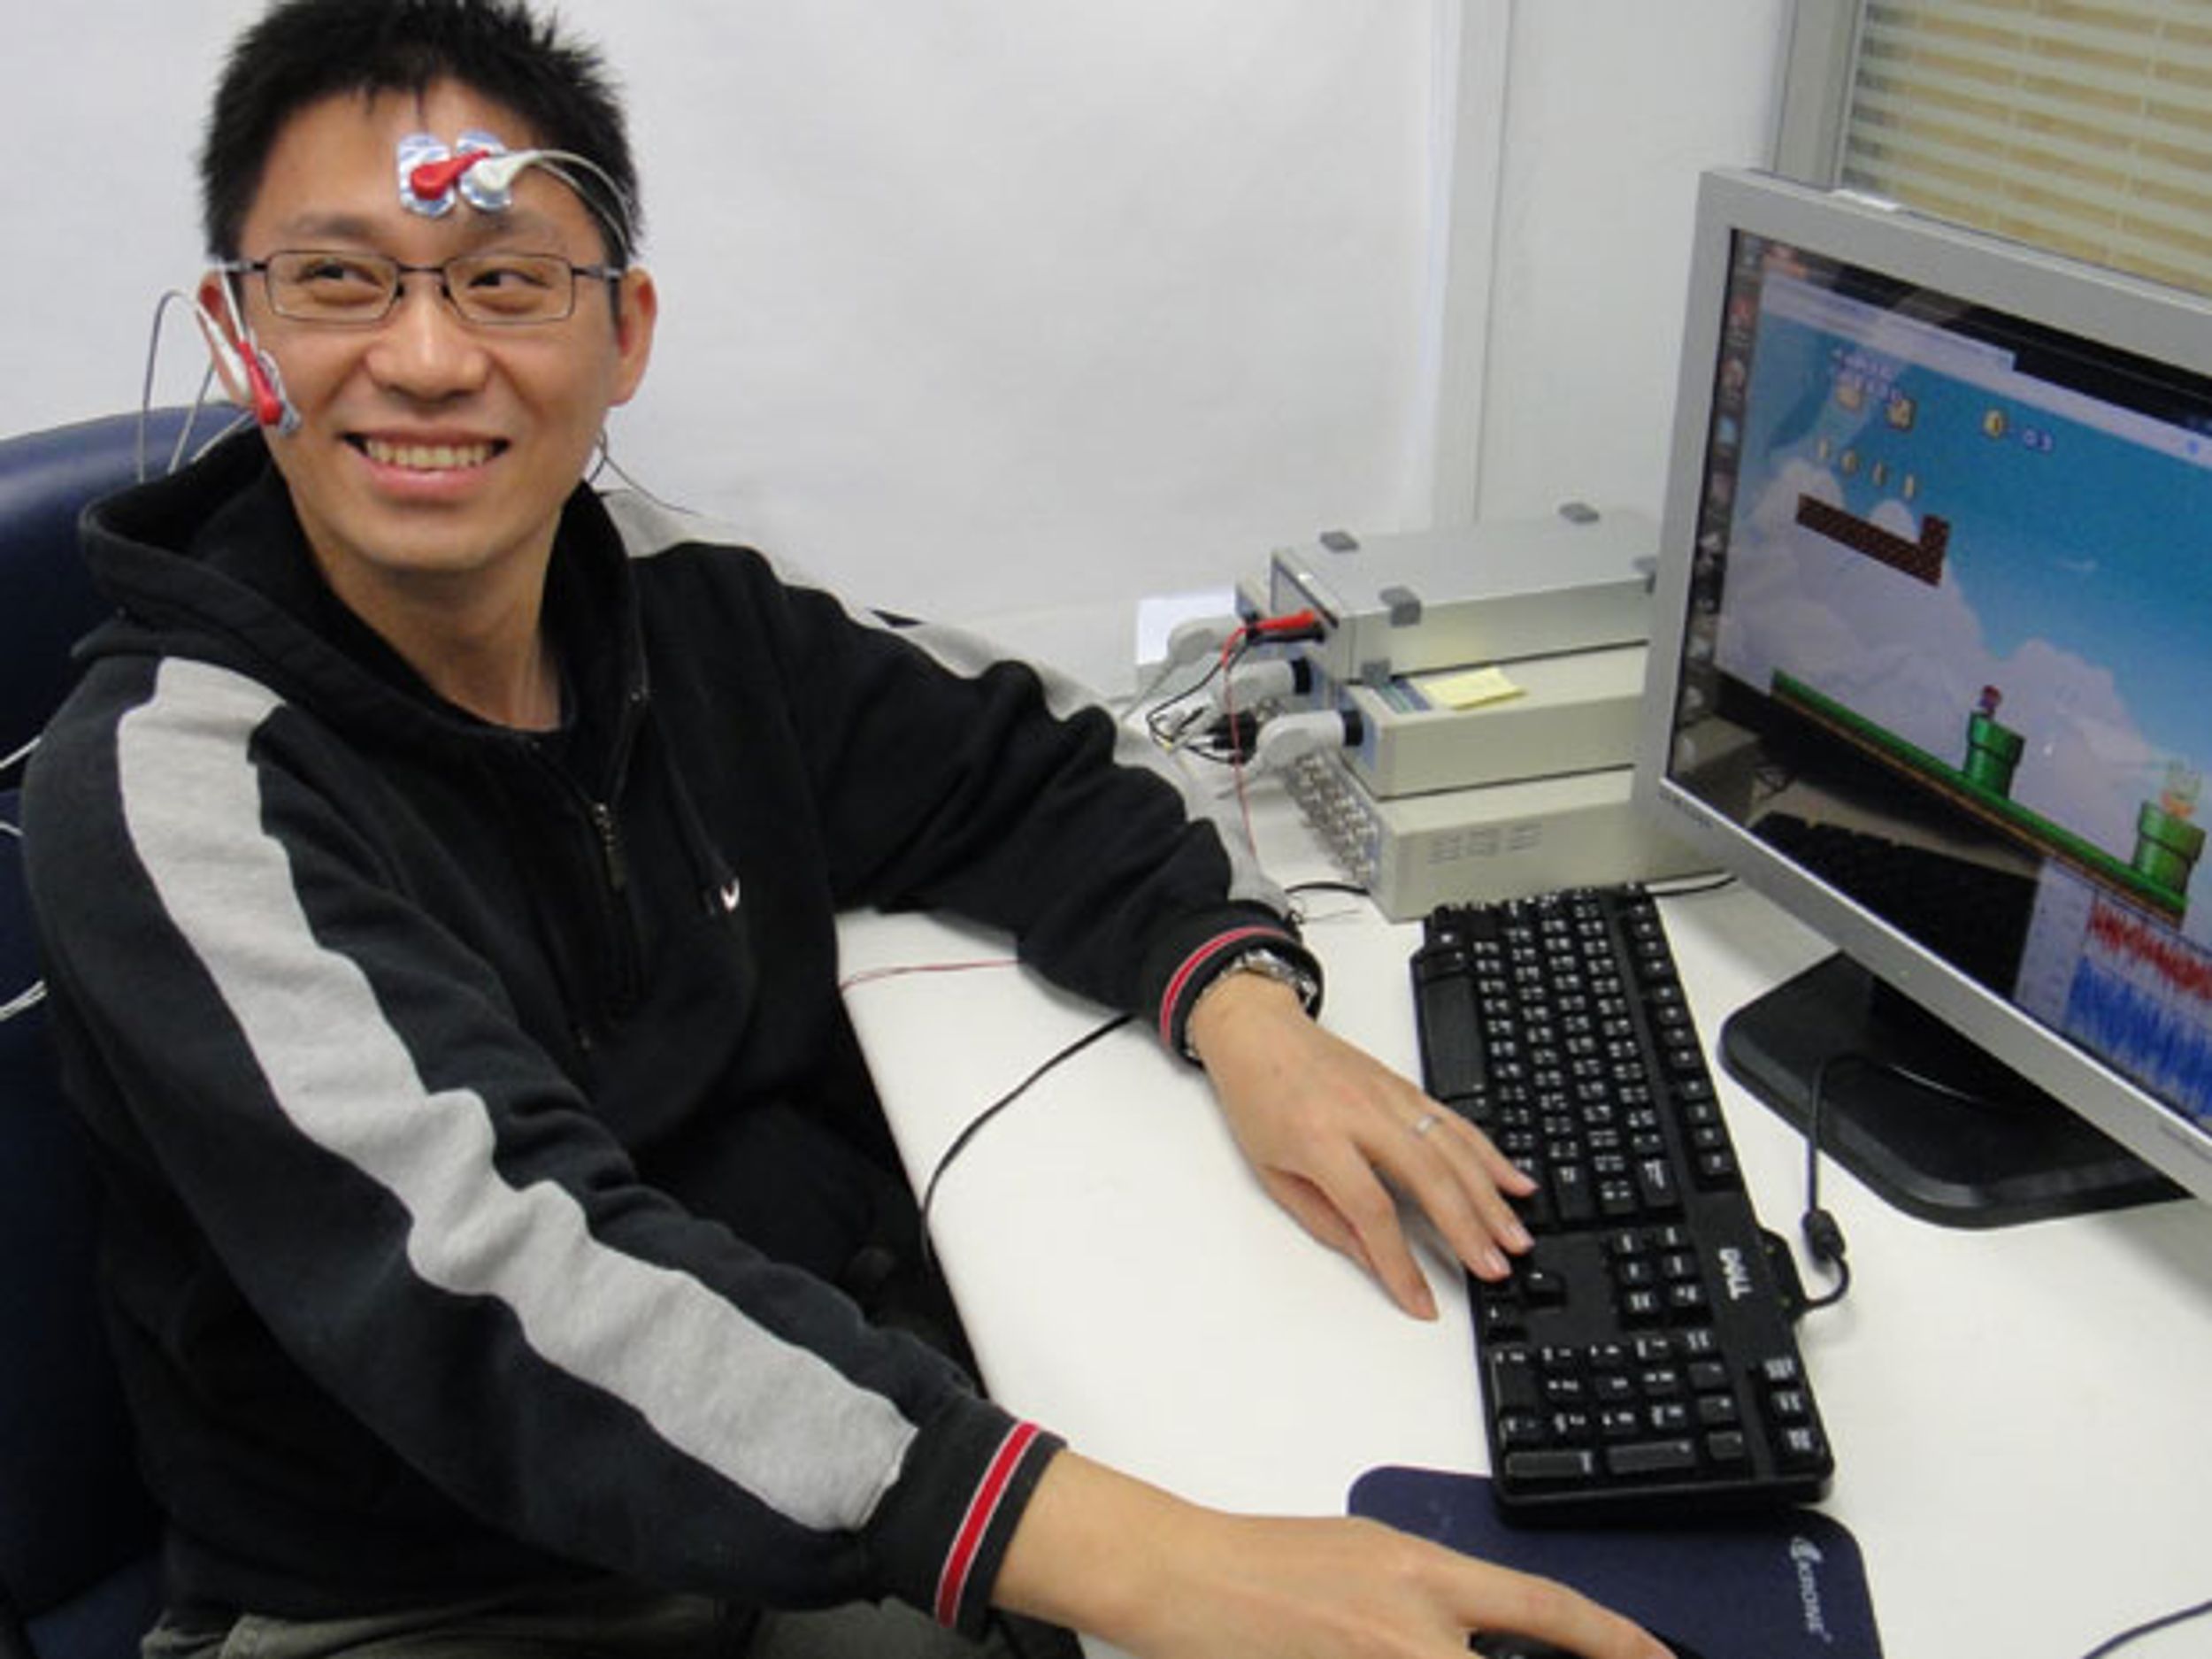 Researchers in Taiwan recorded the electrical signals of muscles involved in positive and negative emotions when subjects played a new online game. 